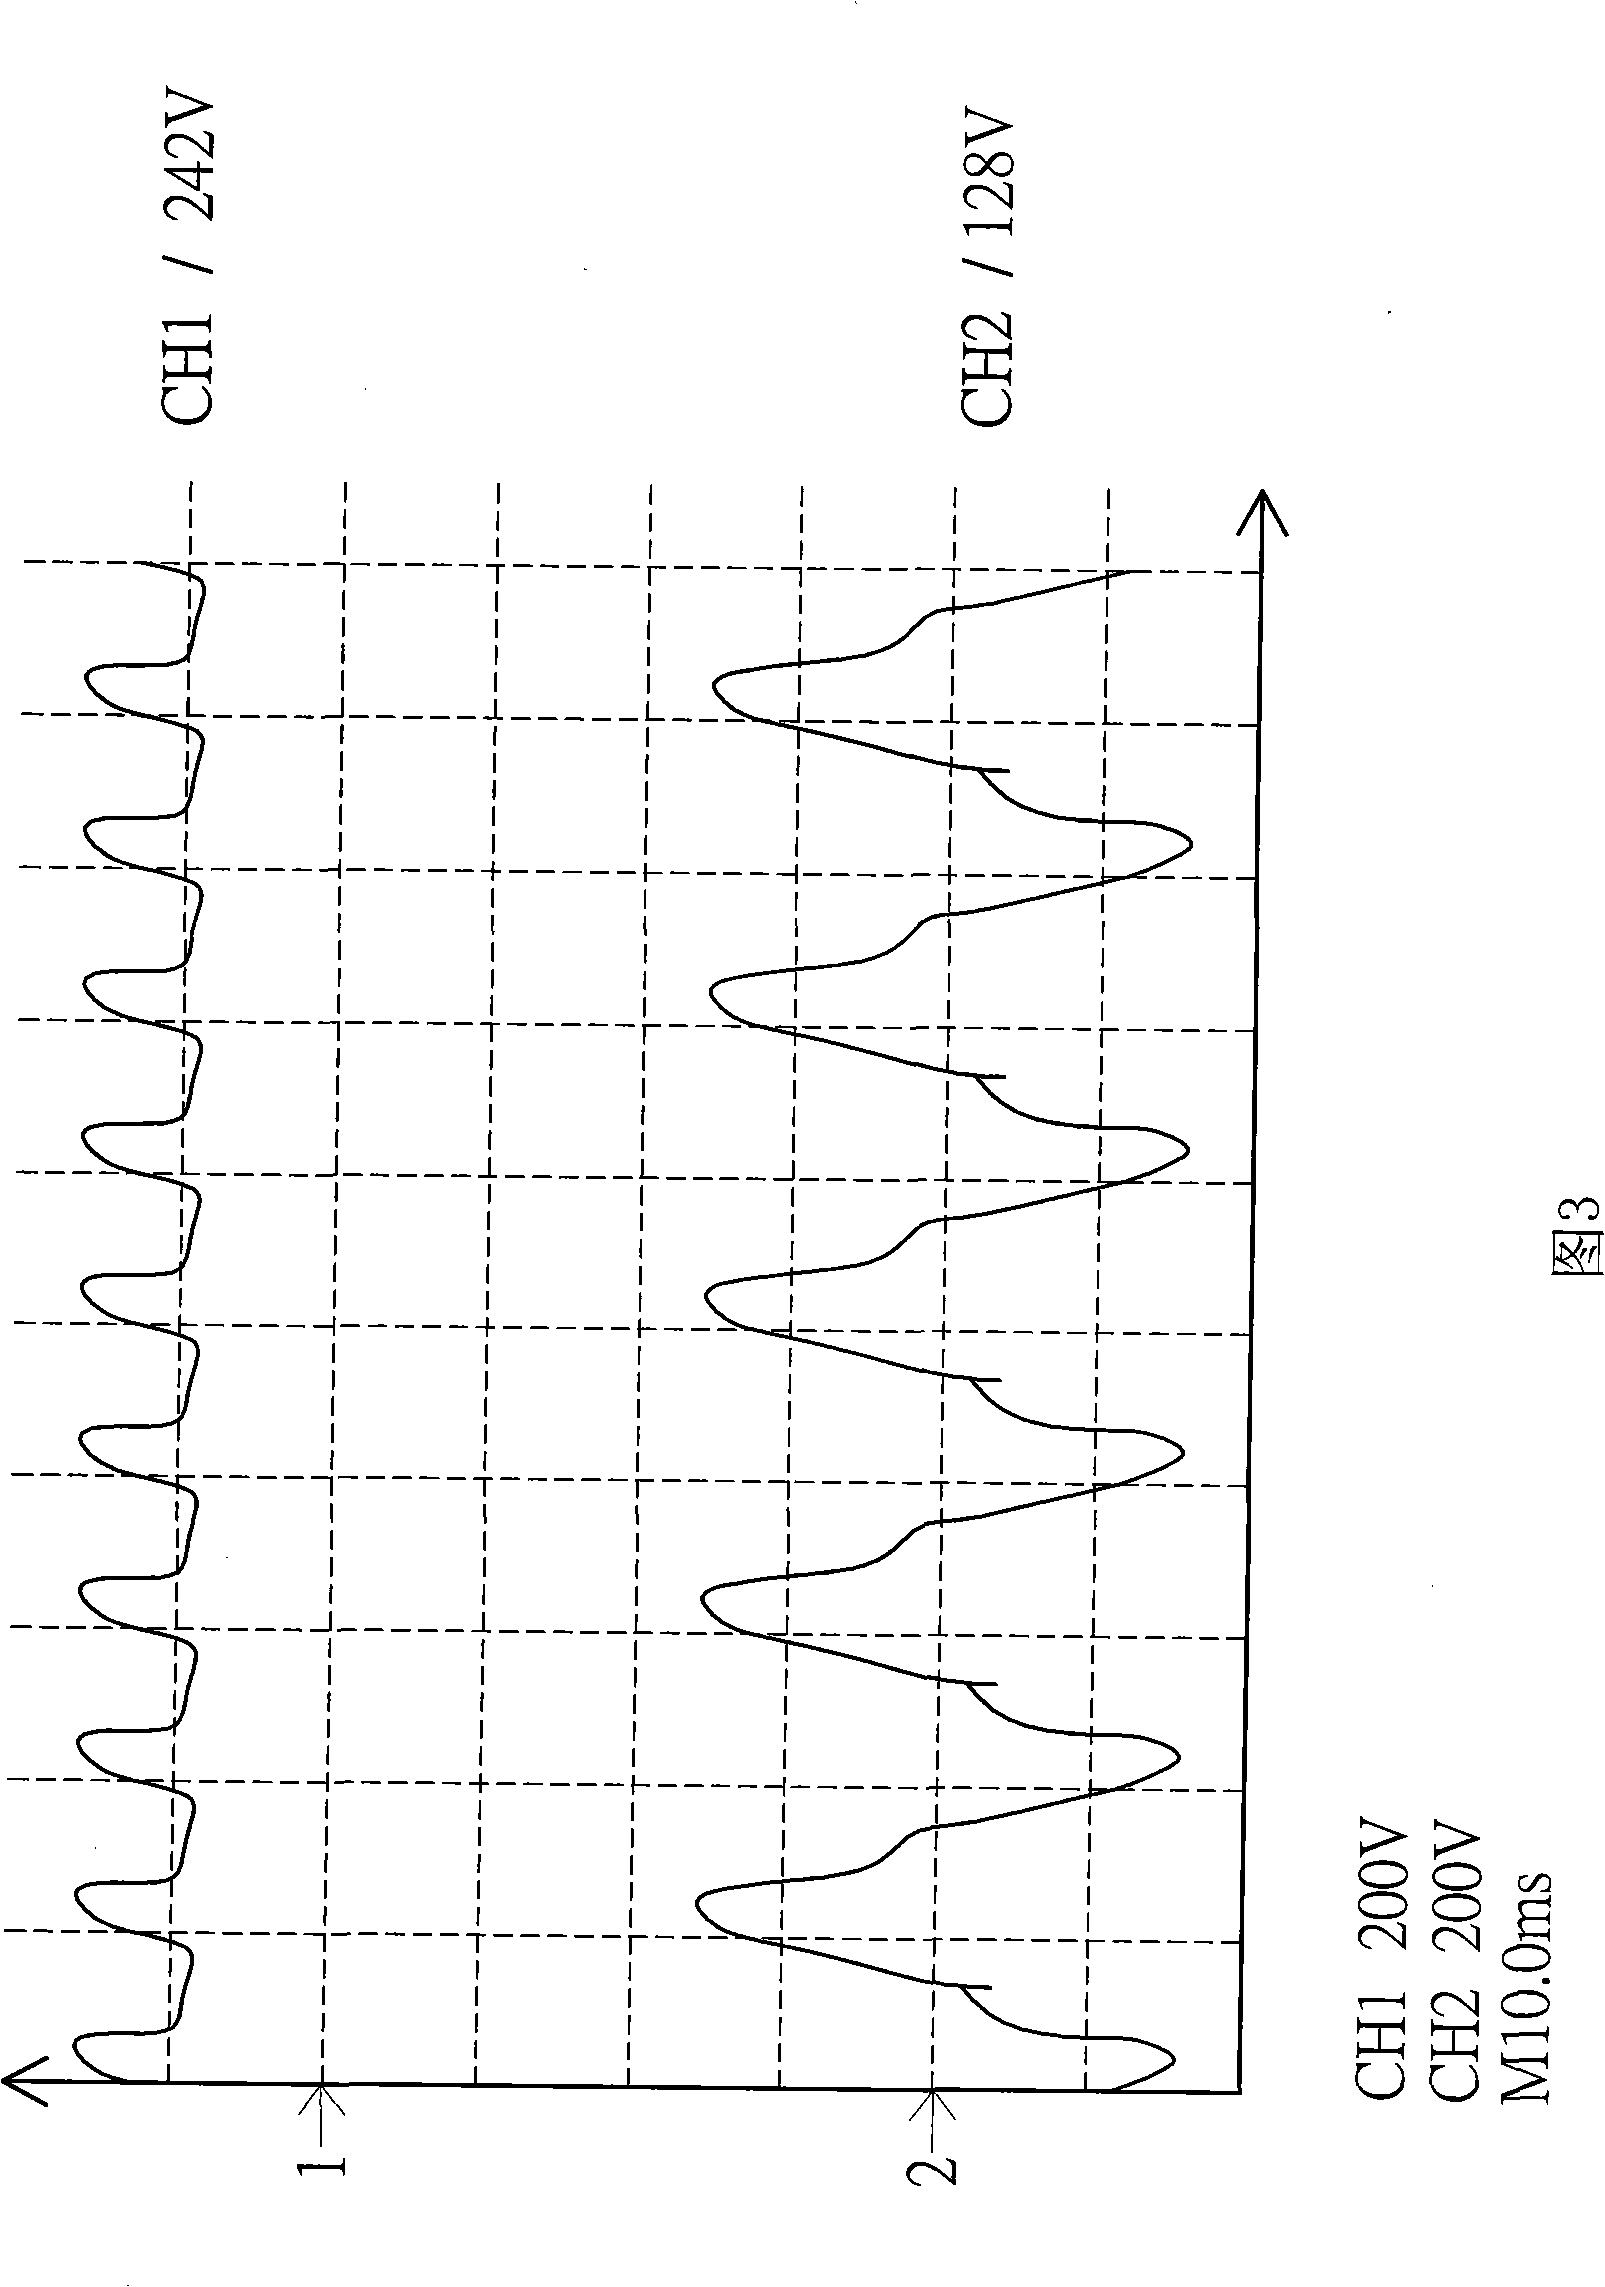 Amplitude modulation type energy accumulation frequency conversion circuit